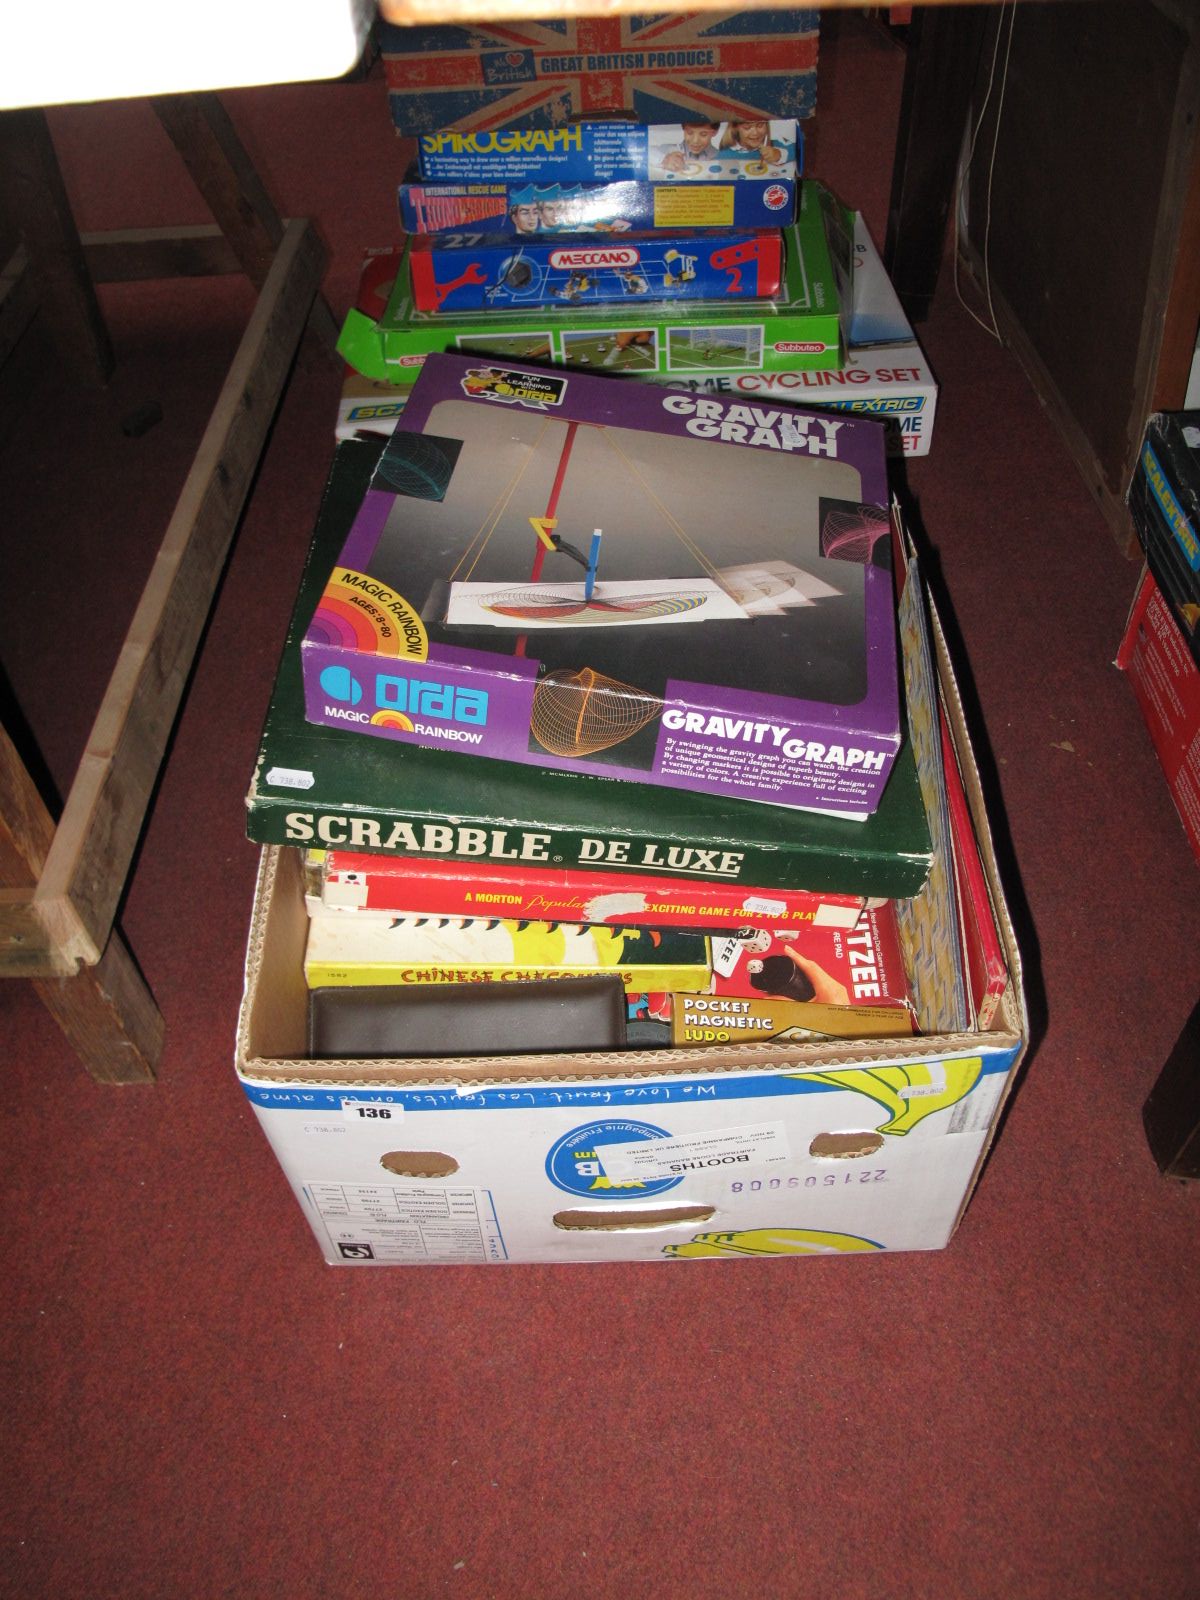 A Quantity of Mid XX Century and Later Board Games, puzzles and card games, including Deluxe